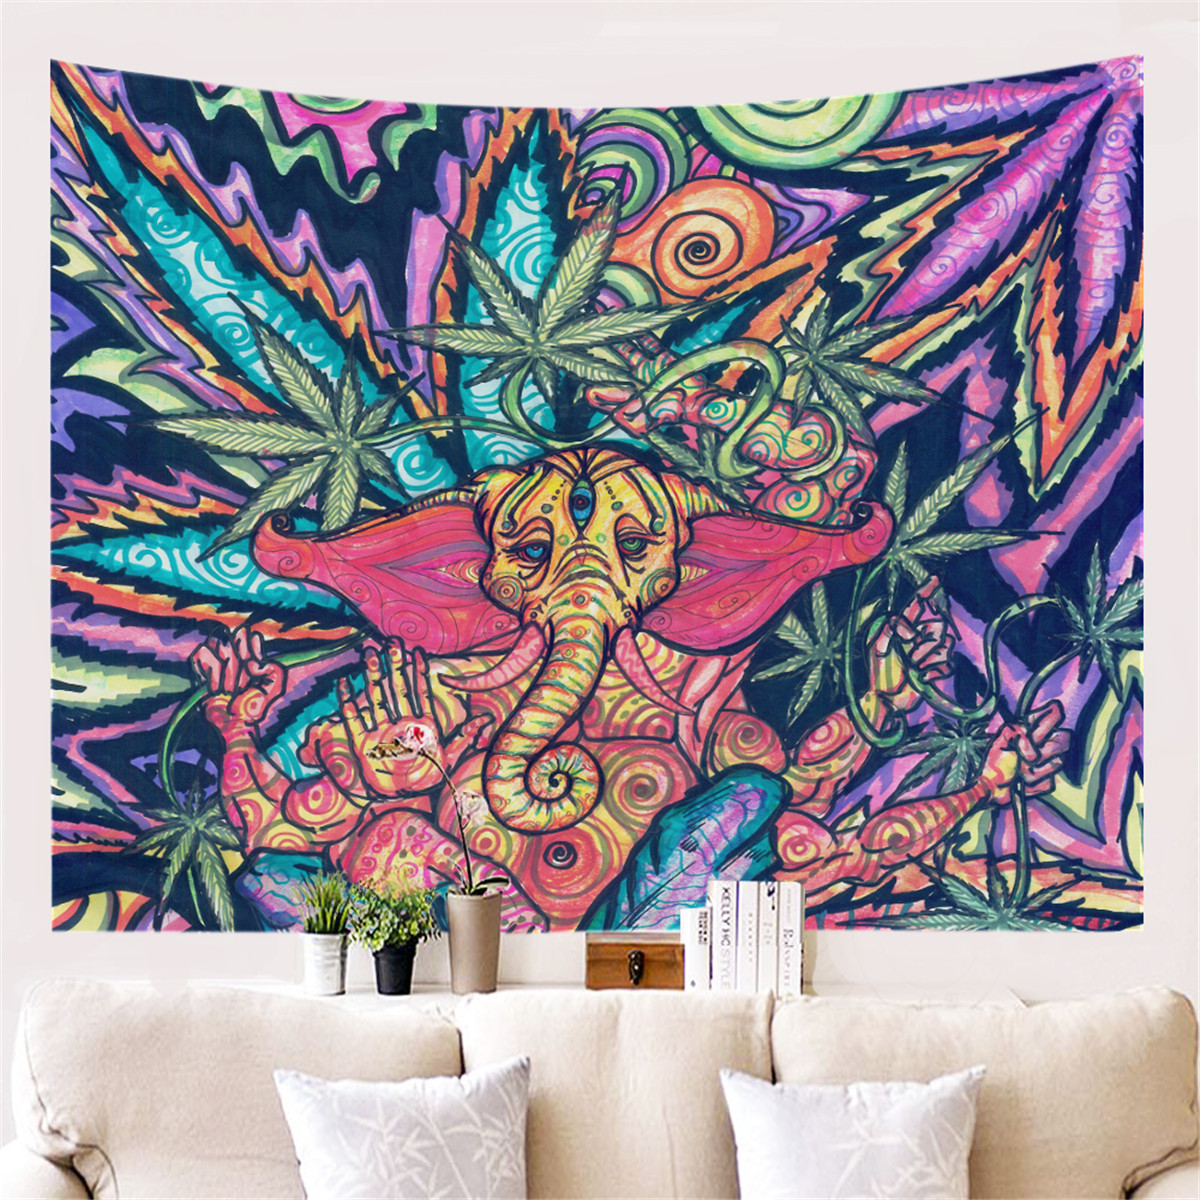 Colorful-Dye-Elephant-Tapestry-Wall-Hanging-Hippie-Tapestry-Colored-Printed-Decorative-Indian-Tapest-1751738-9